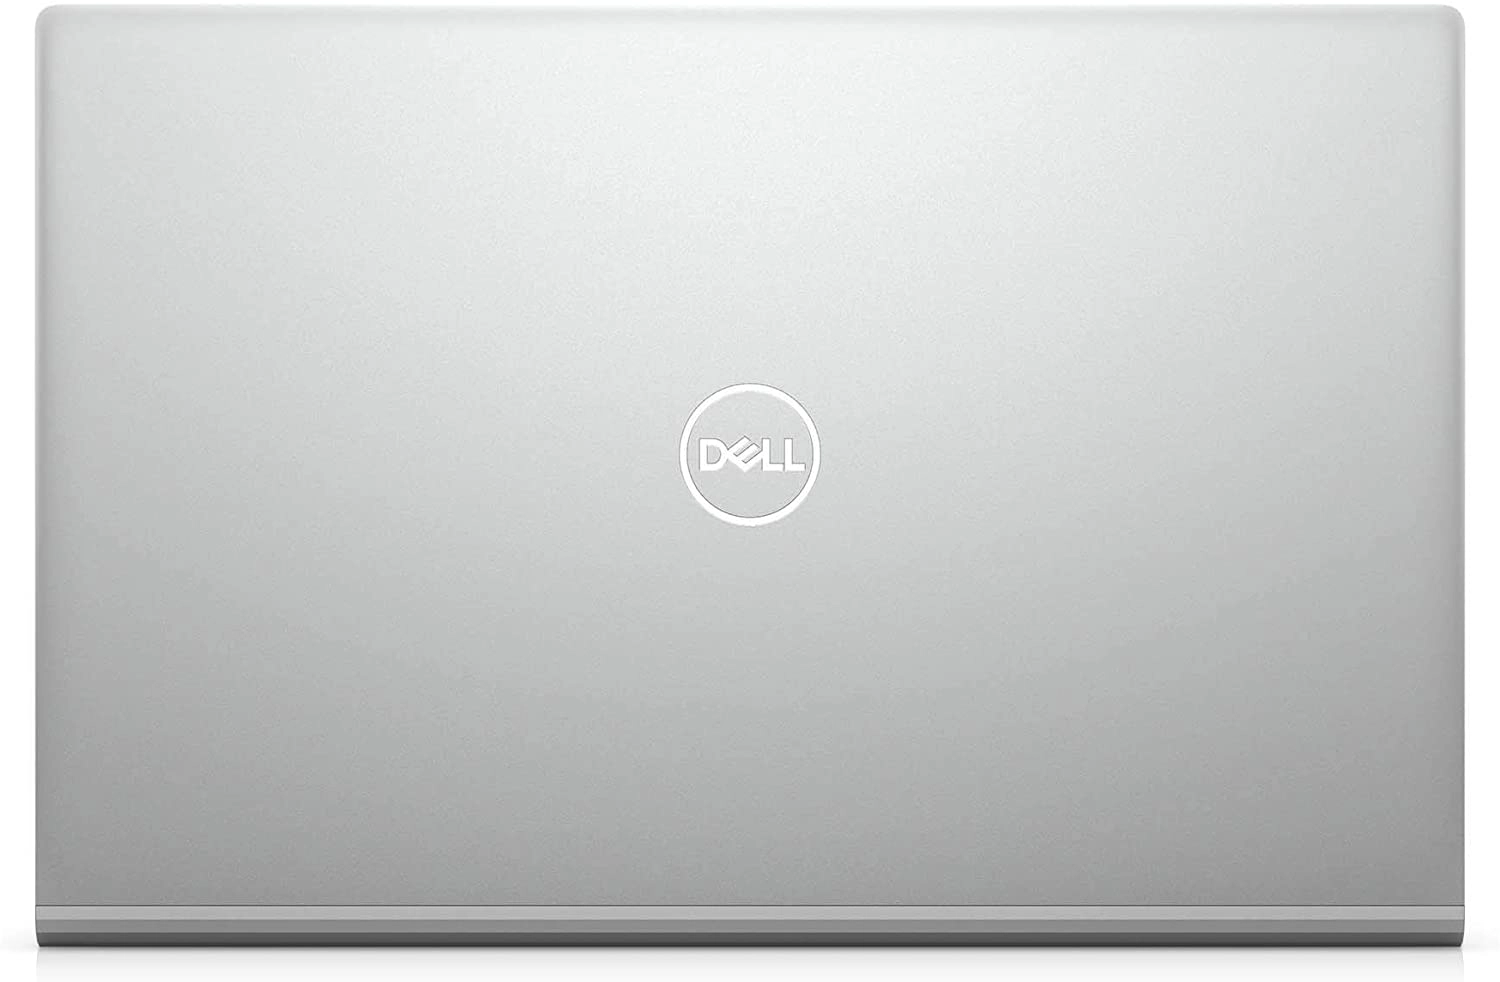 Dell Inspiron 5502 laptop image